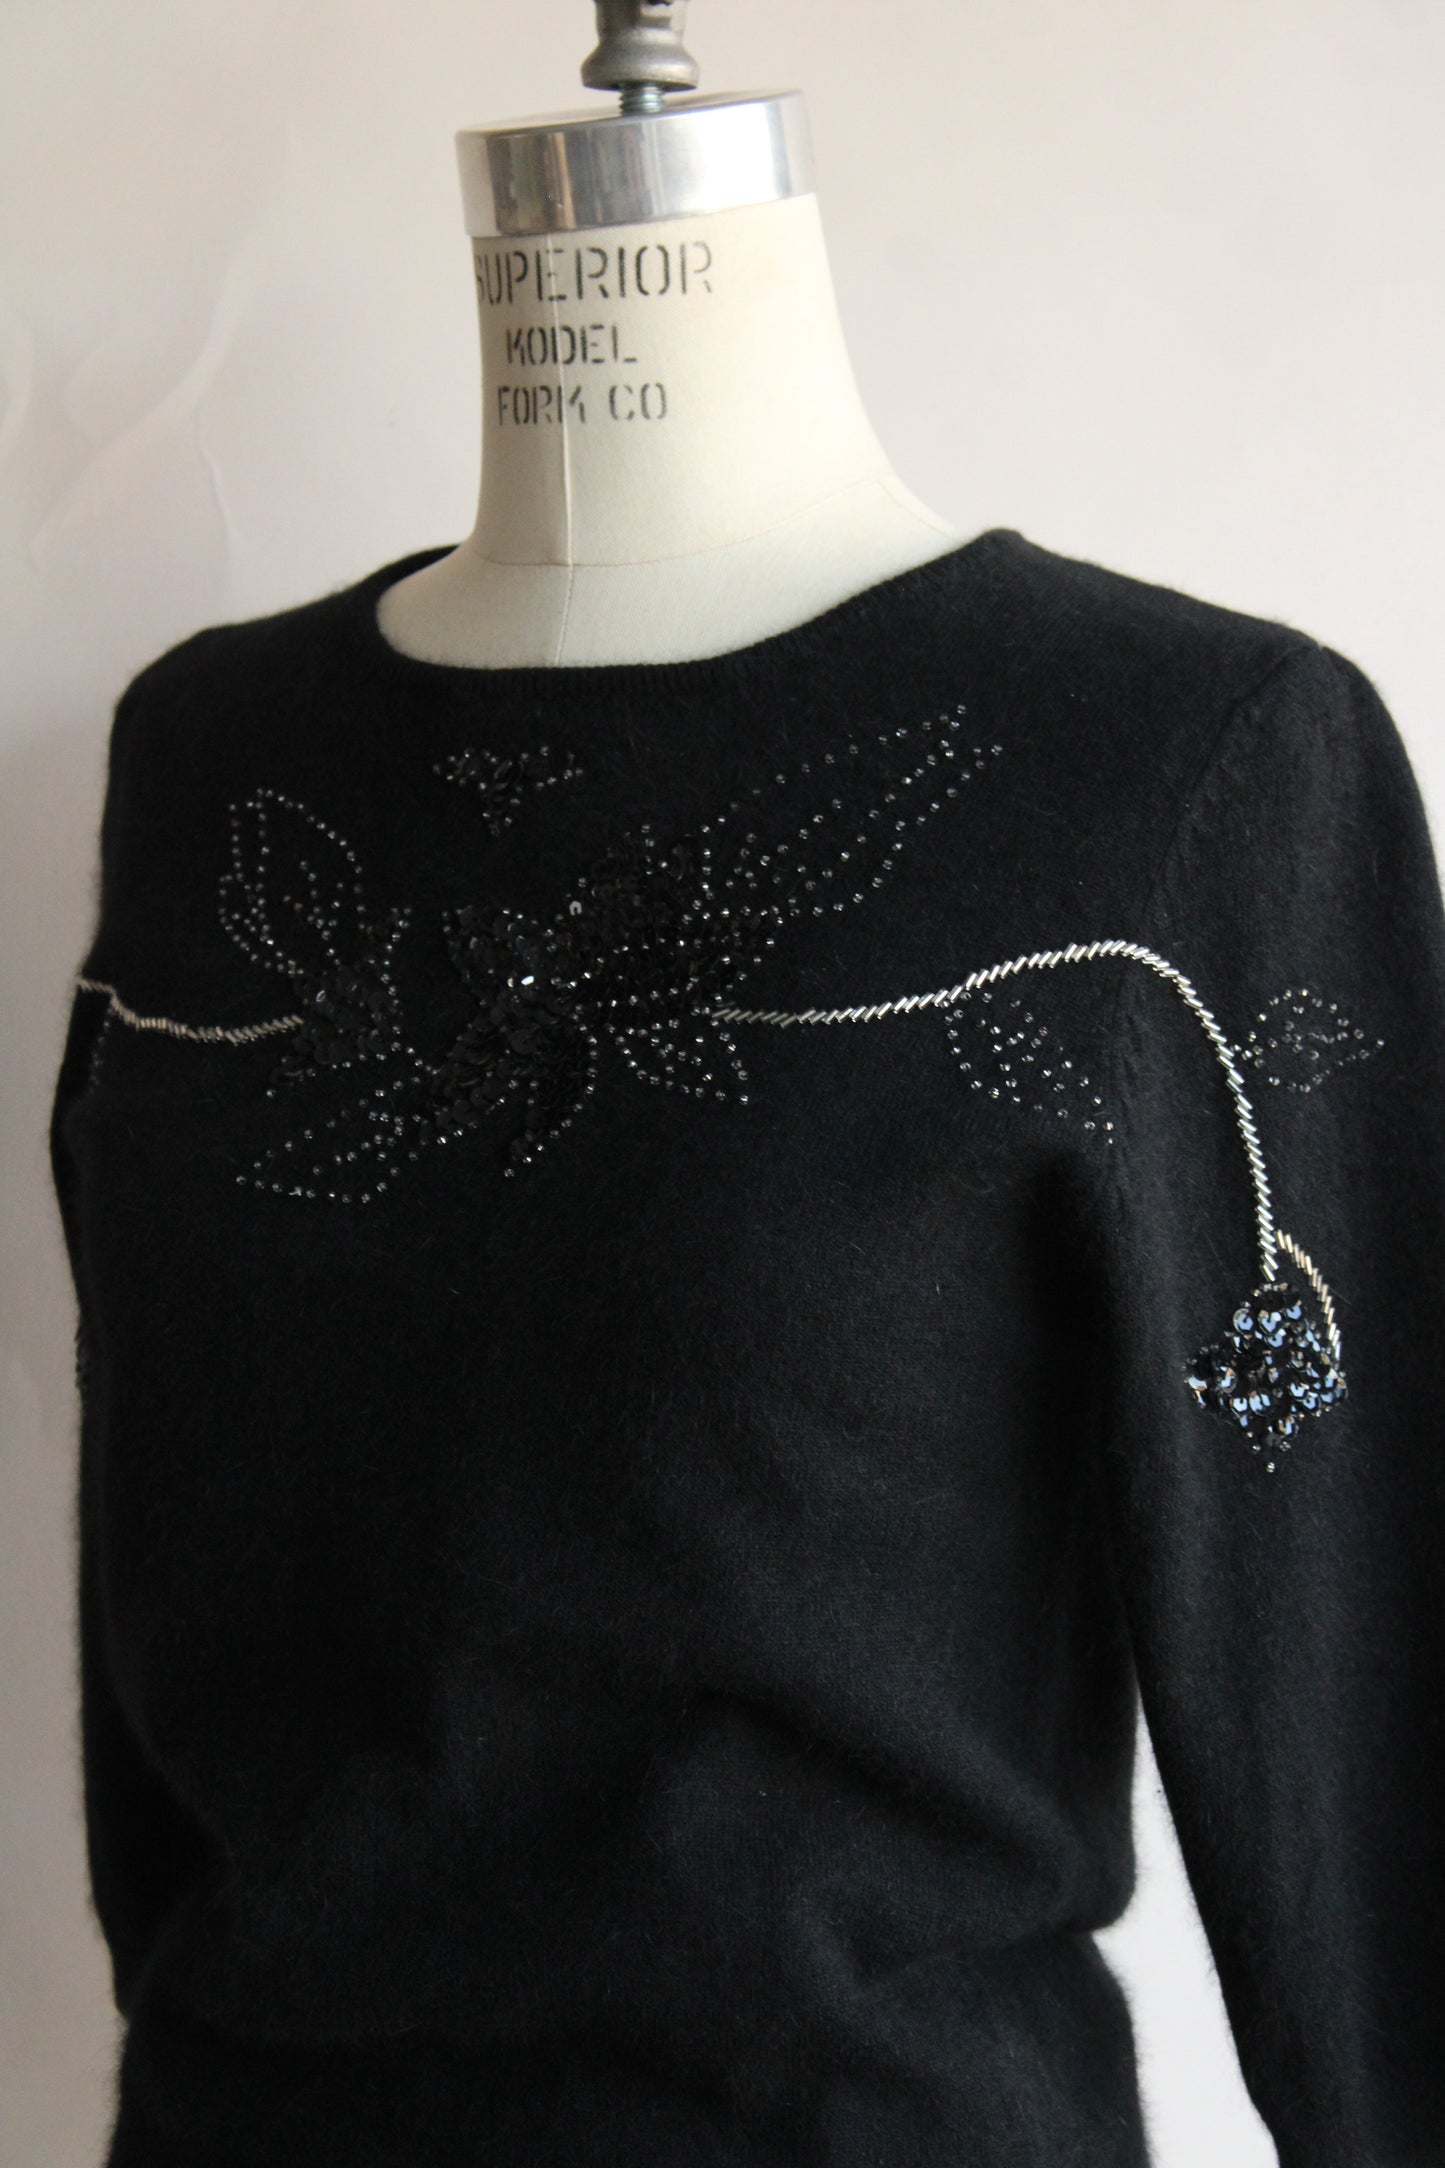 Vintage 1980s Does 1940s Angora Sweater with Keyhole Back and Beading